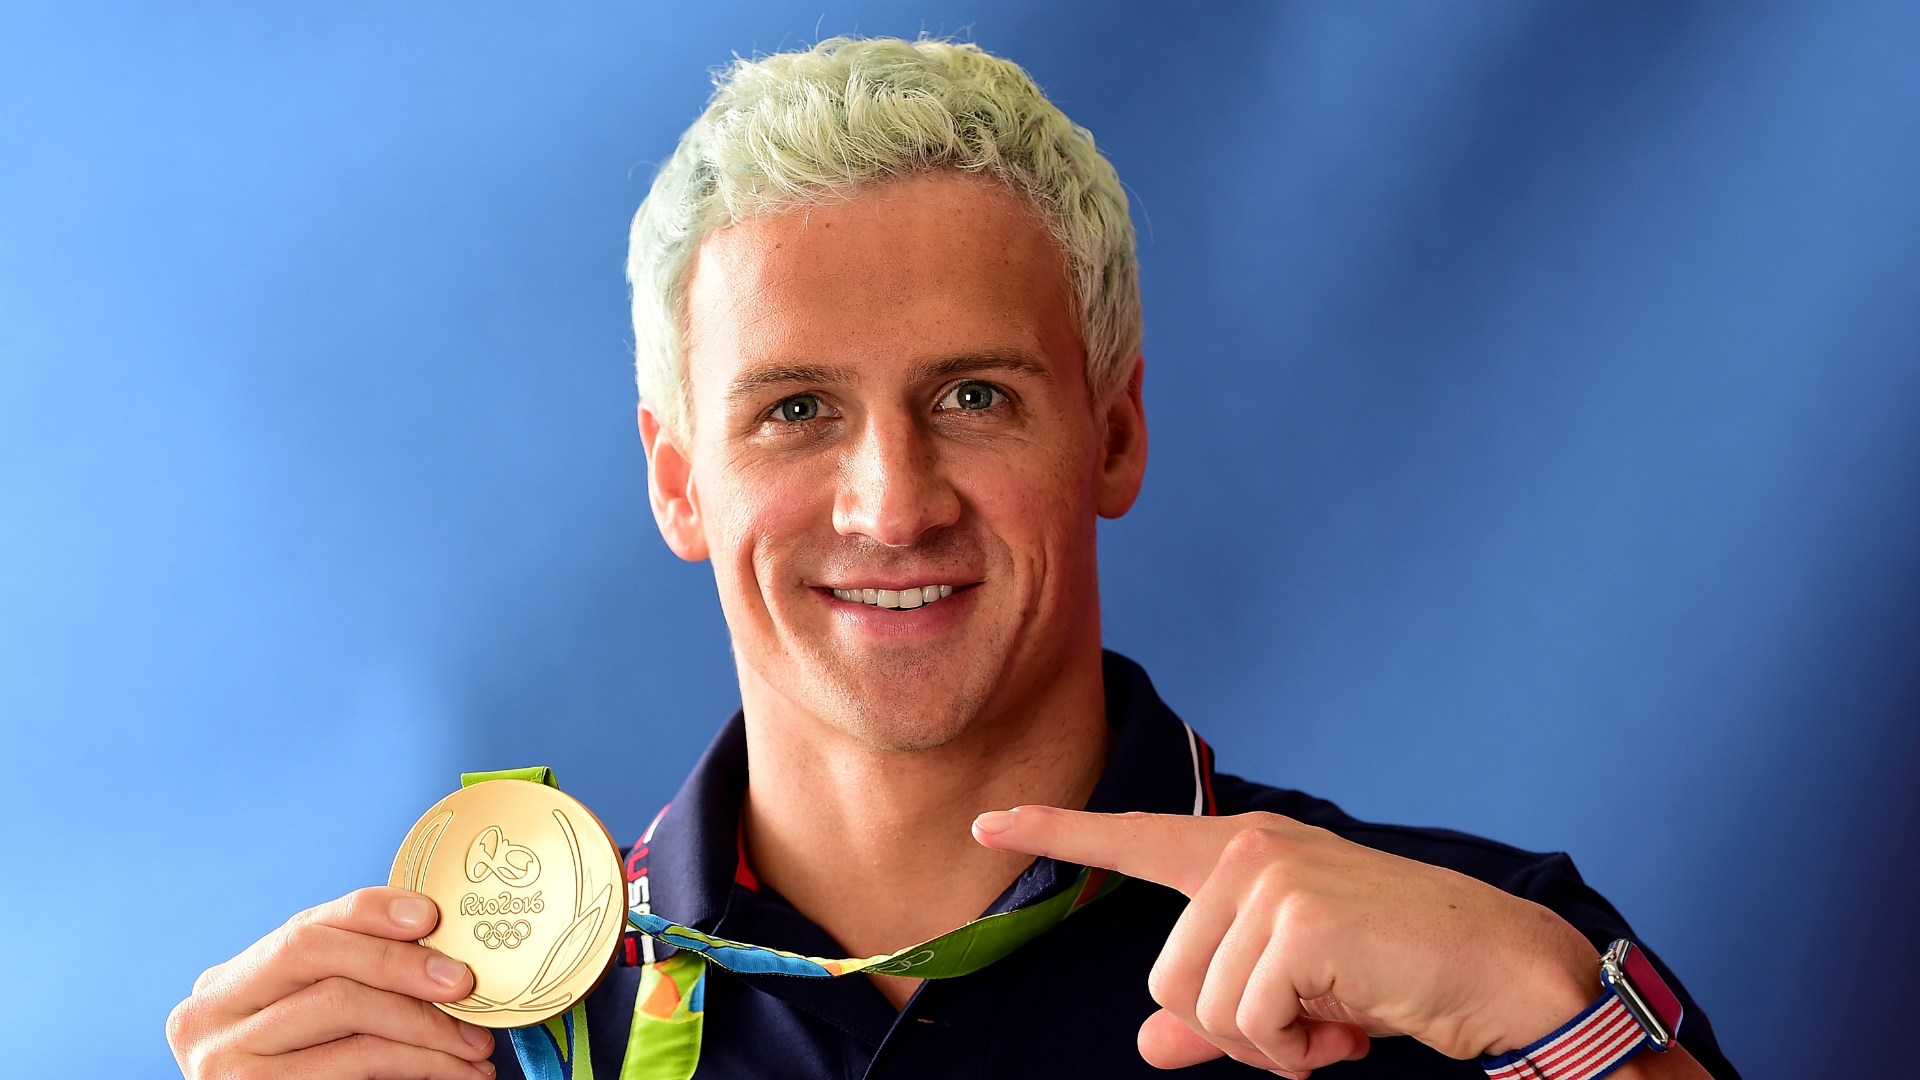 Olympic swimmer Lochte gets 14-month ban for anti-doping violation